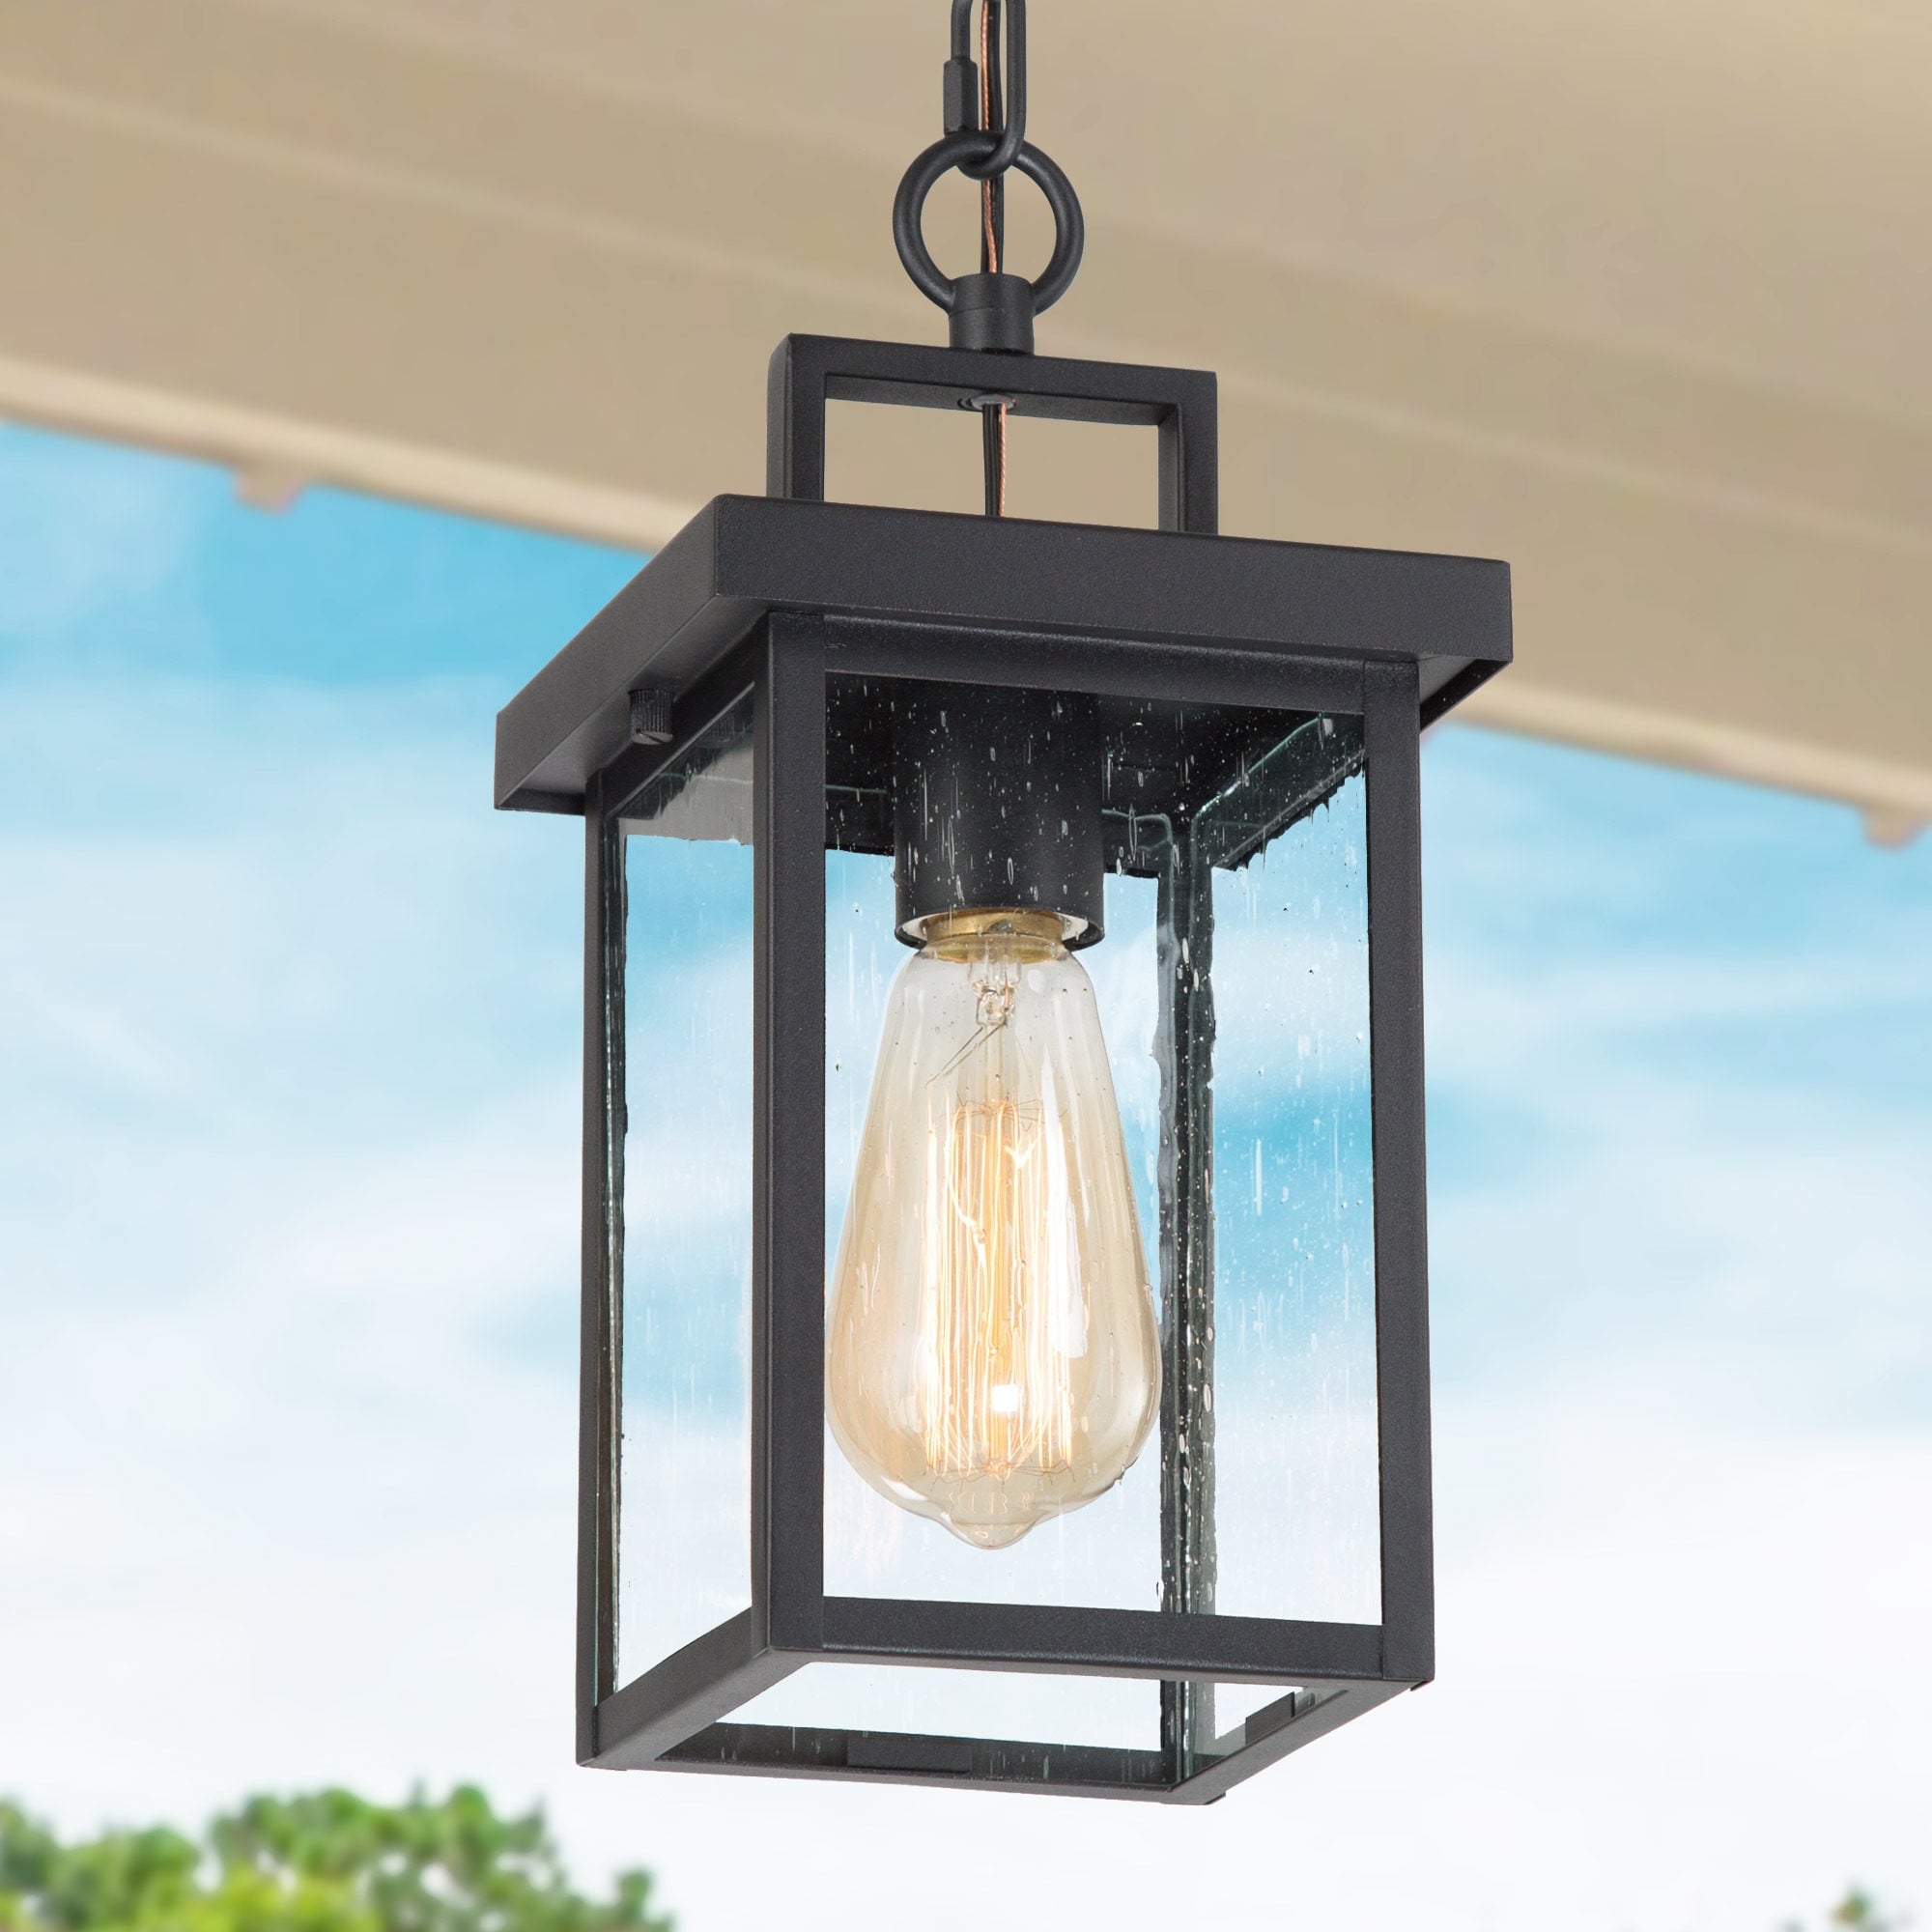 Outdoor Porch Light LED Bulb 9" Black Fixture with Clear Glass Panes    458-06 